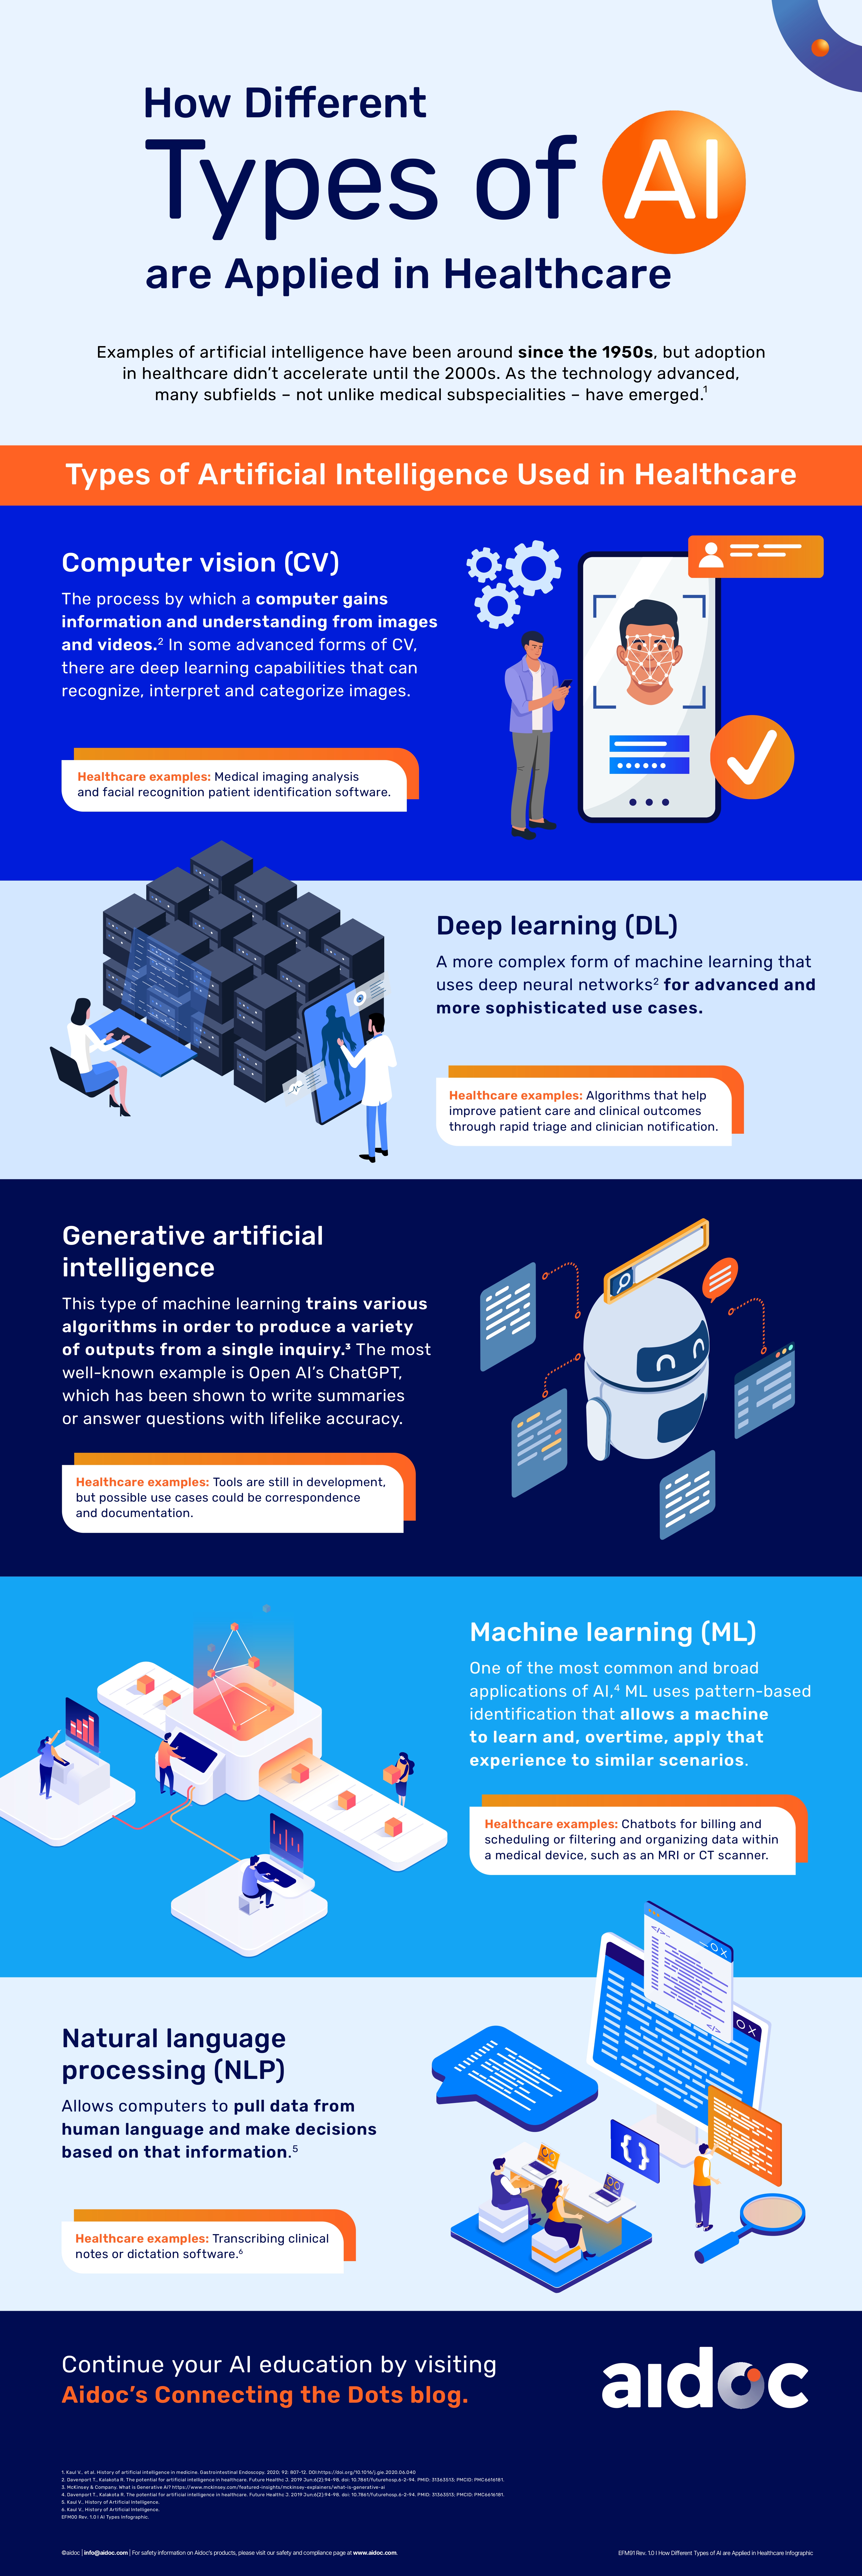 Infographic showcasing applications of AI in healthcare through different types of AI that can be used in healthcare environments.